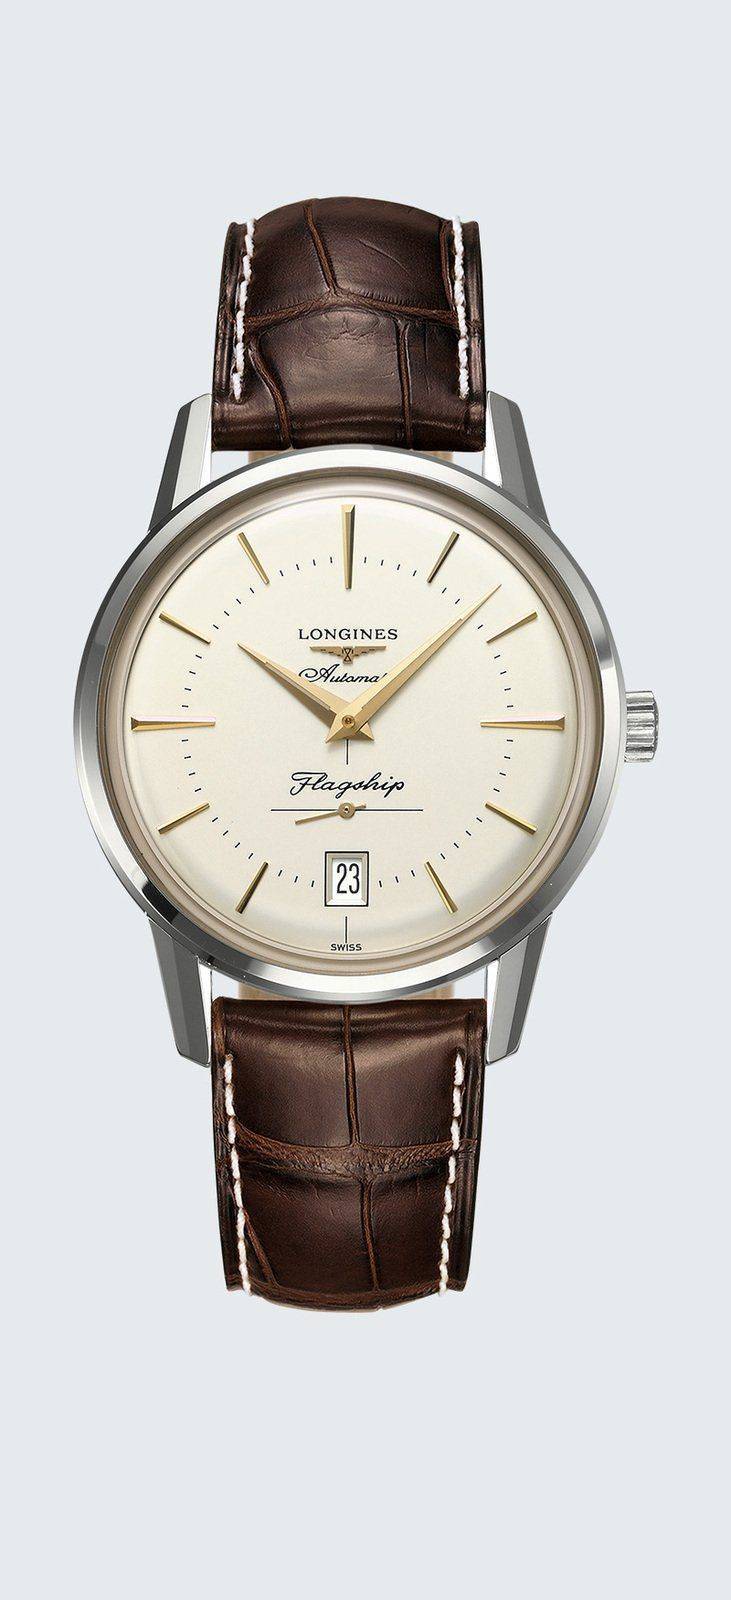 watch-heritage-collection--L4.795.4.78.2-800x1750.jpg